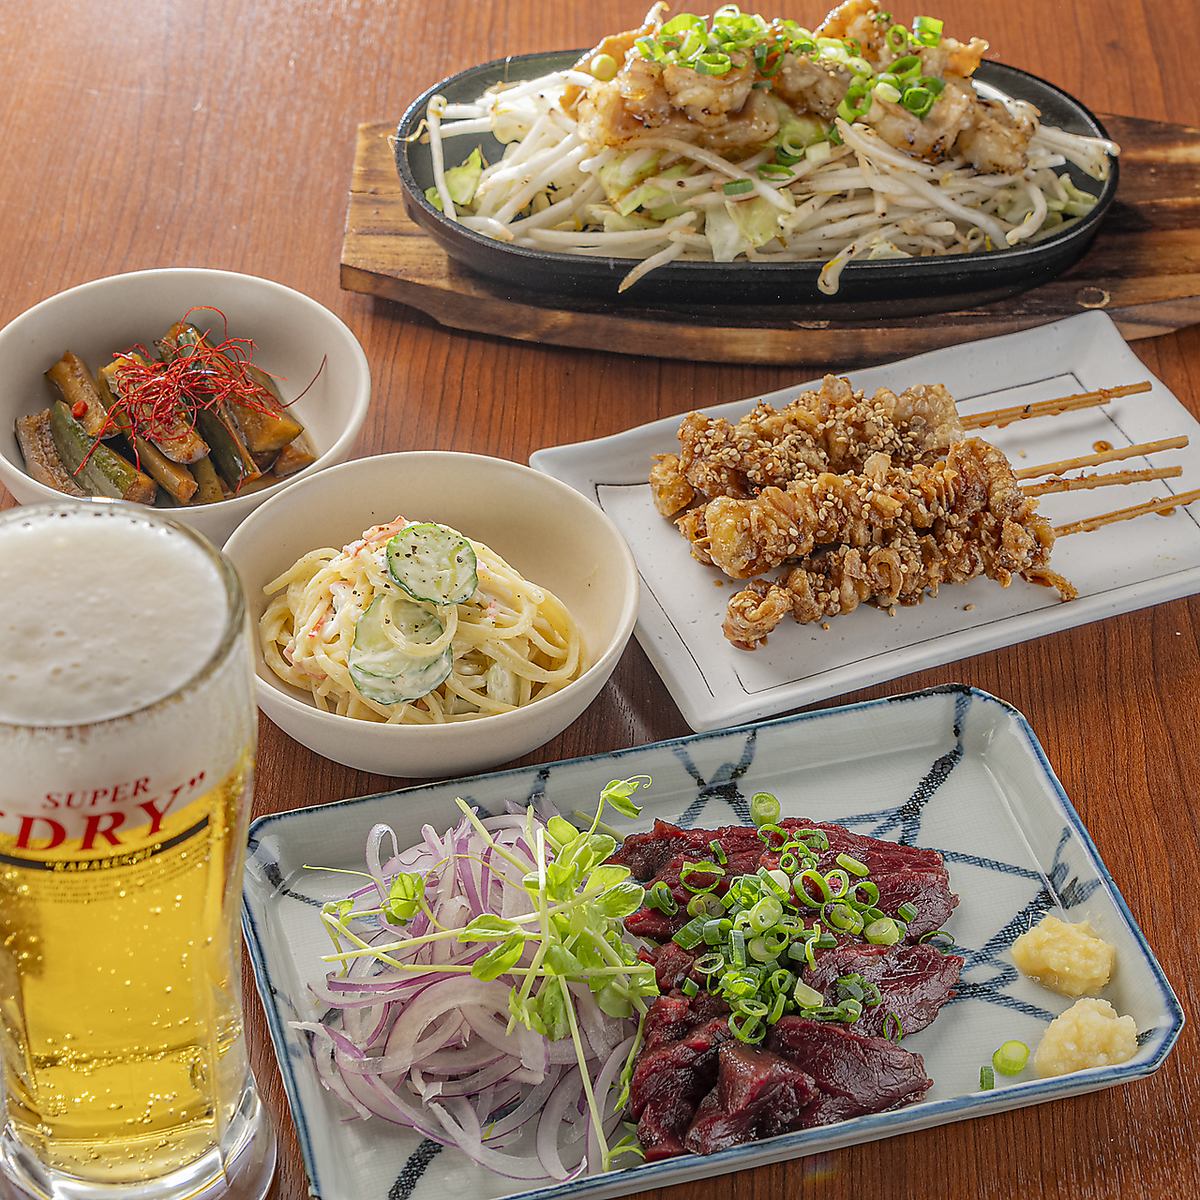 You can enjoy yakitori and teppanyaki dishes that go perfectly with alcohol.